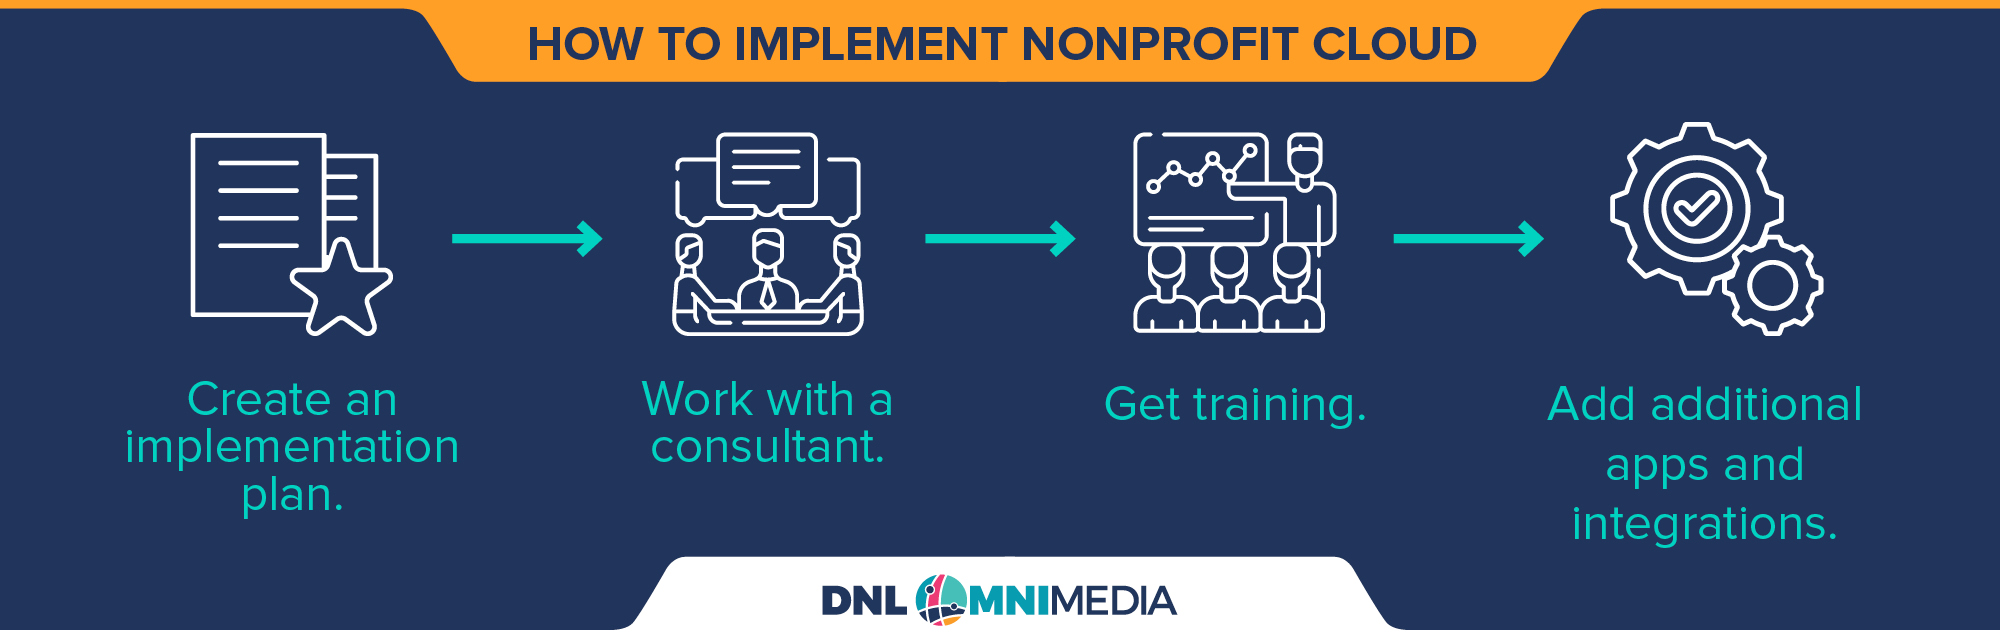 This image and the text below walk through the steps you need to take to implement Nonprofit Cloud.